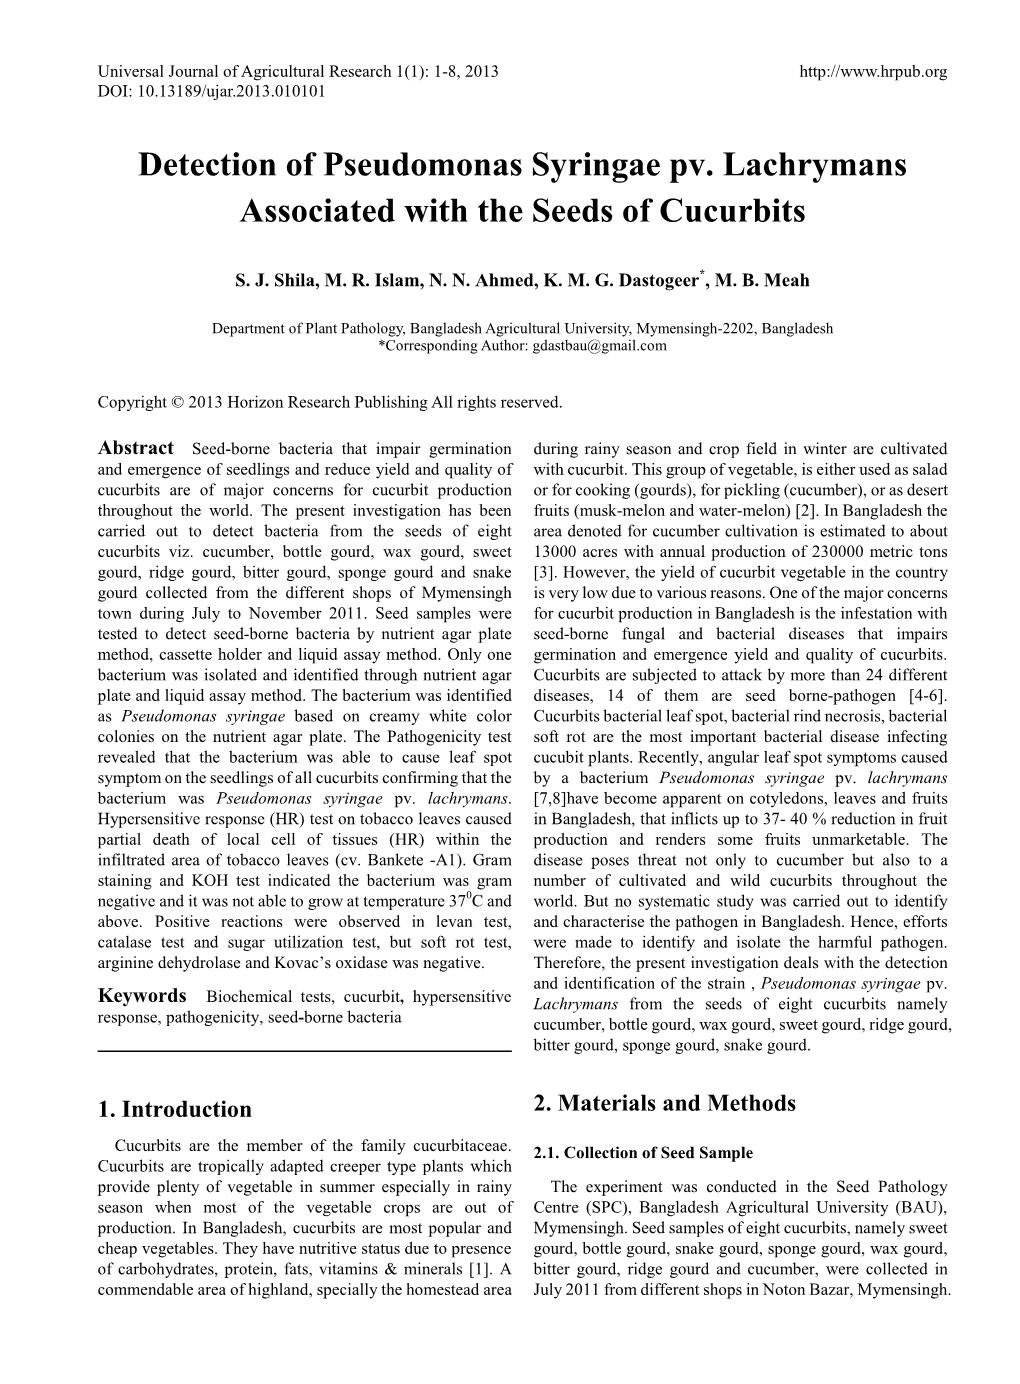 Detection of Pseudomonas Syringae Pv. Lachrymans Associated with the Seeds of Cucurbits